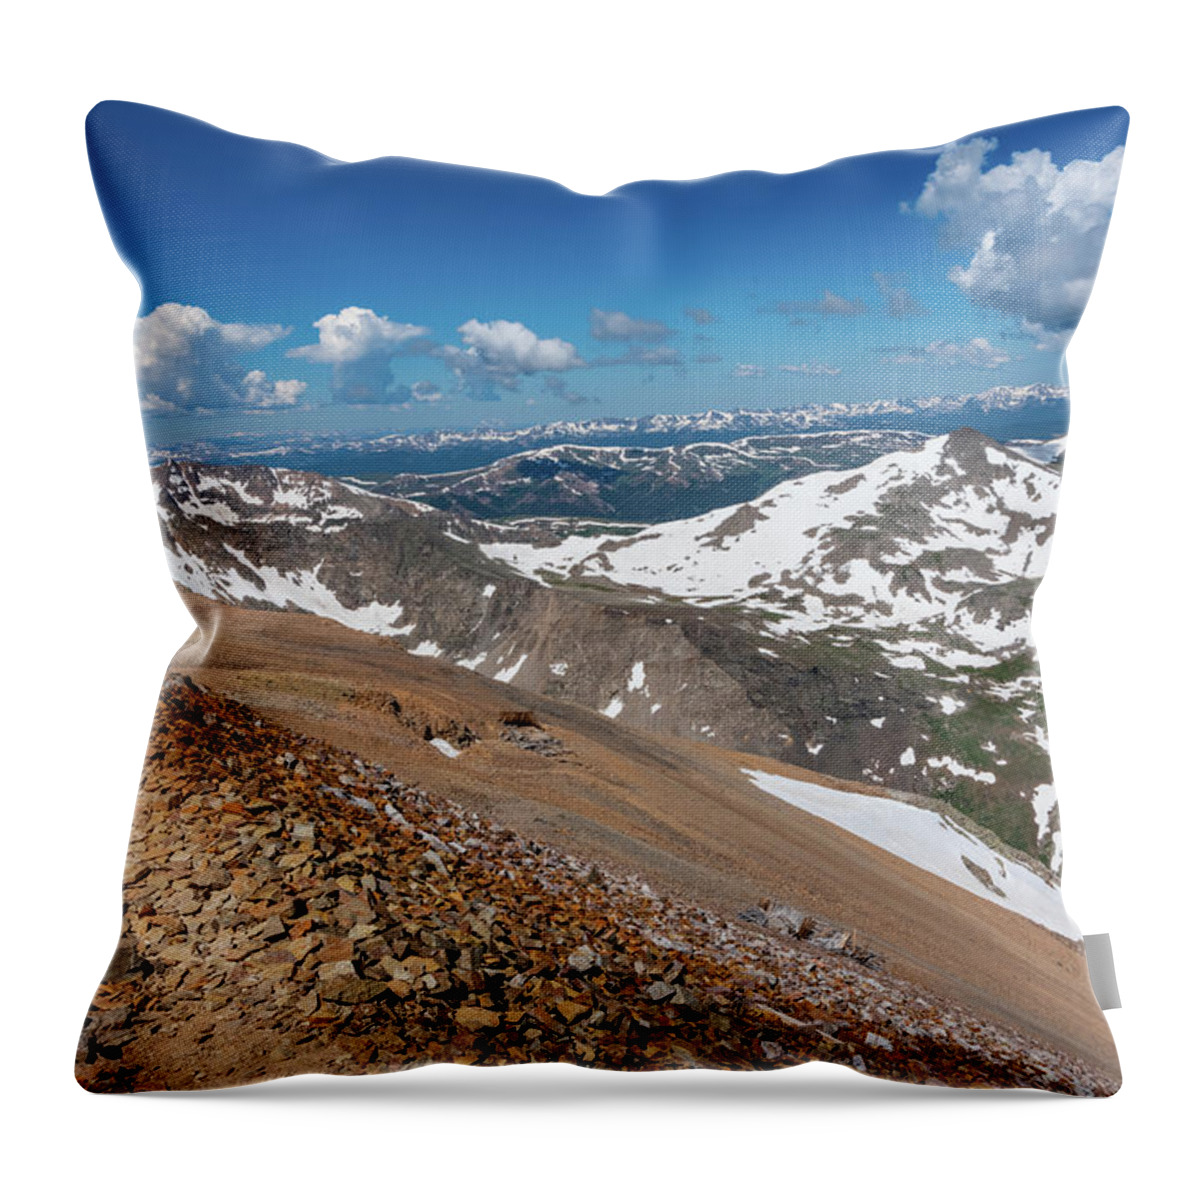 No People Throw Pillow featuring the photograph Mountain View Hiking by Nathan Wasylewski